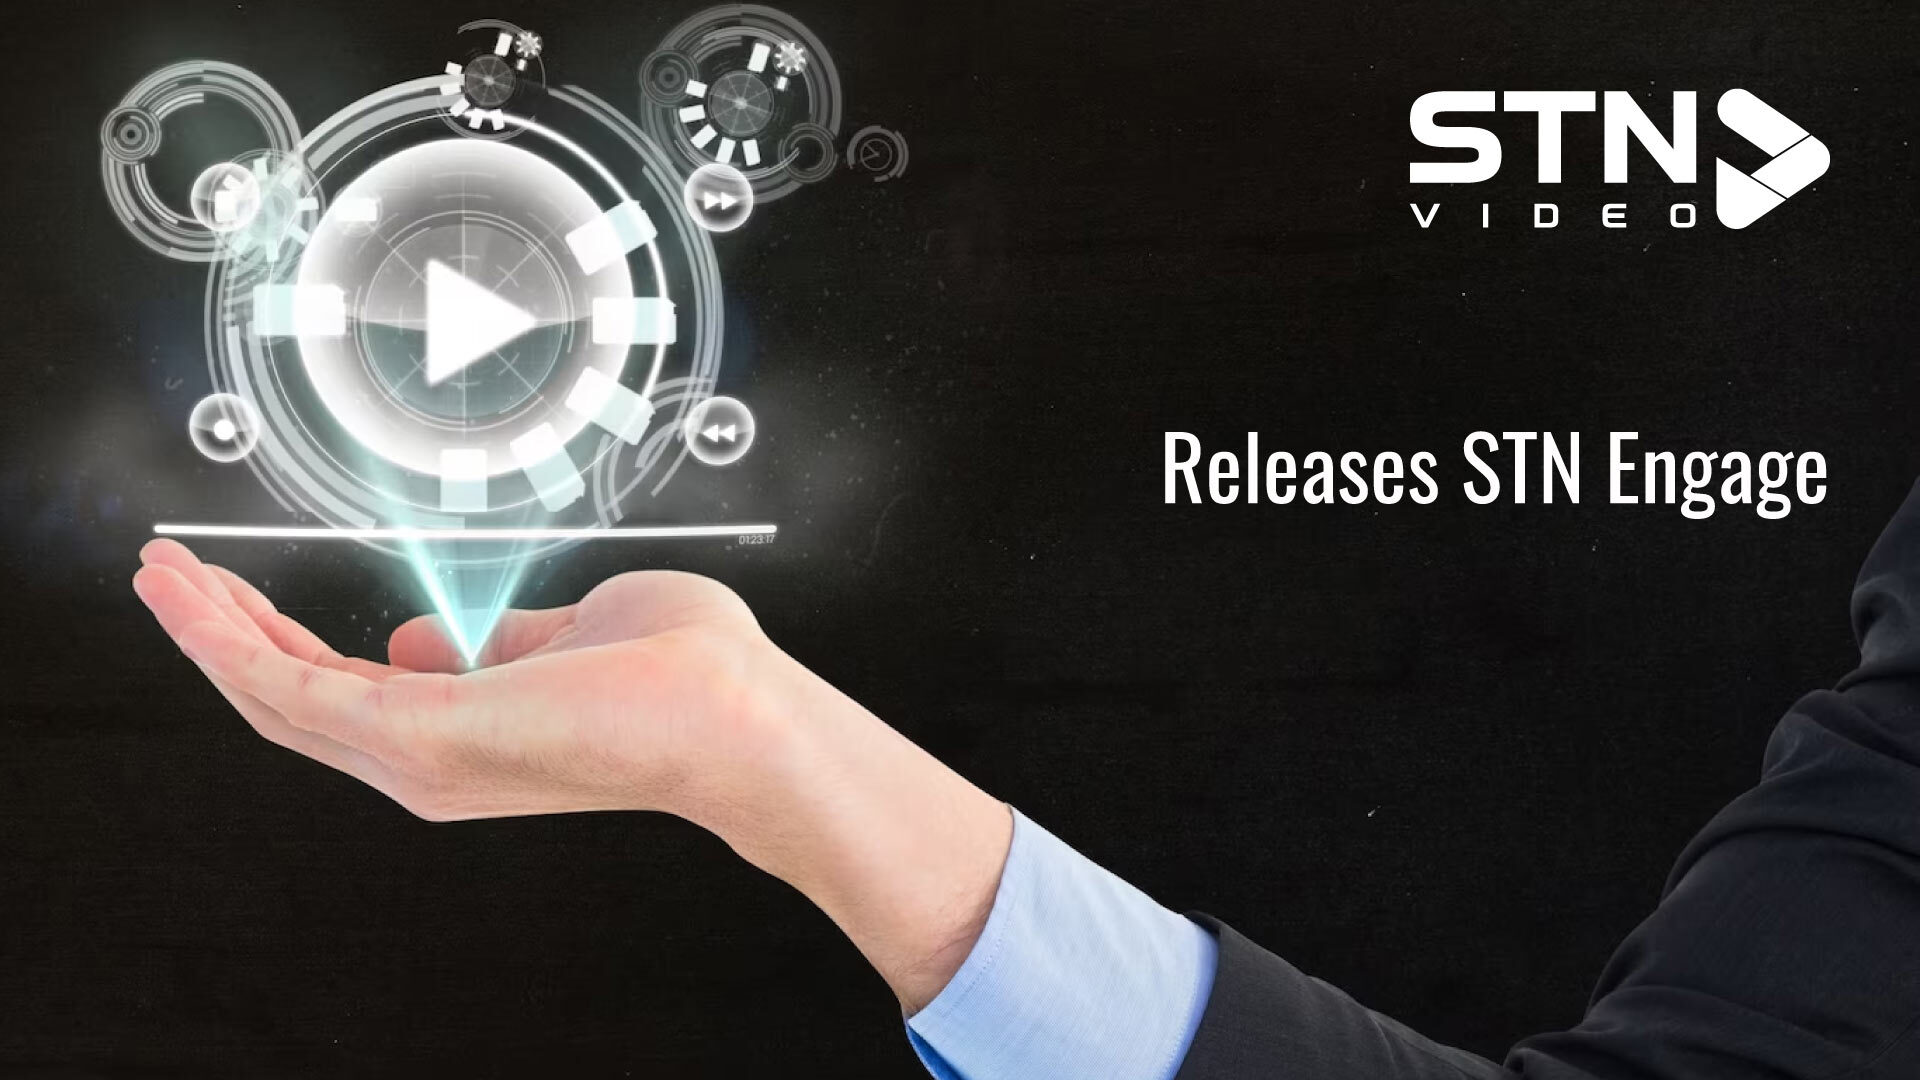 STN Video Releases STN Engage